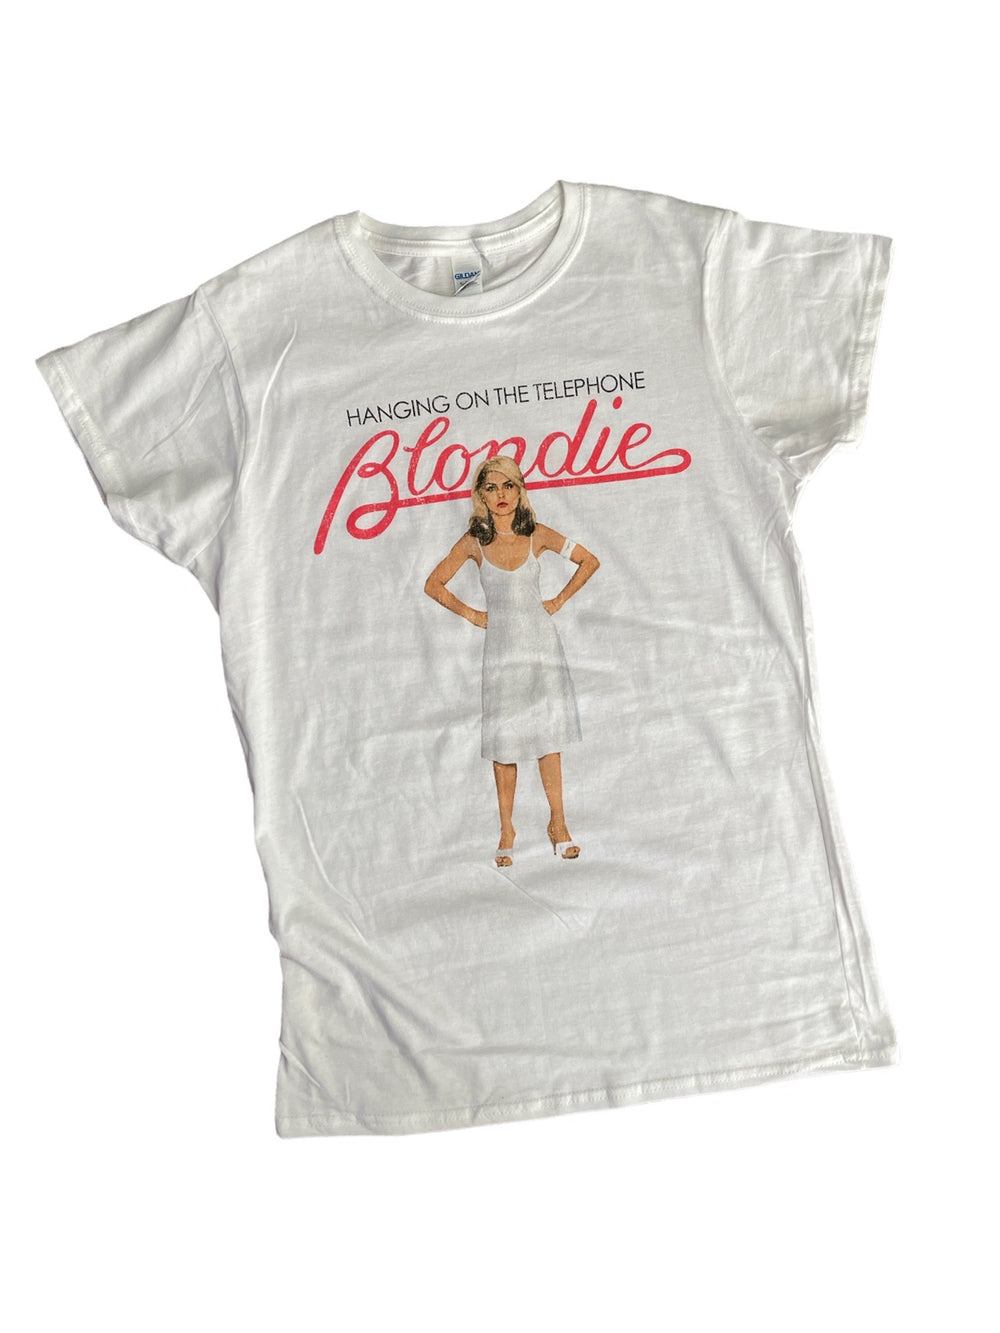 Blondie Telephone White Ladies Official T-Shirt Brand New Various Sizes